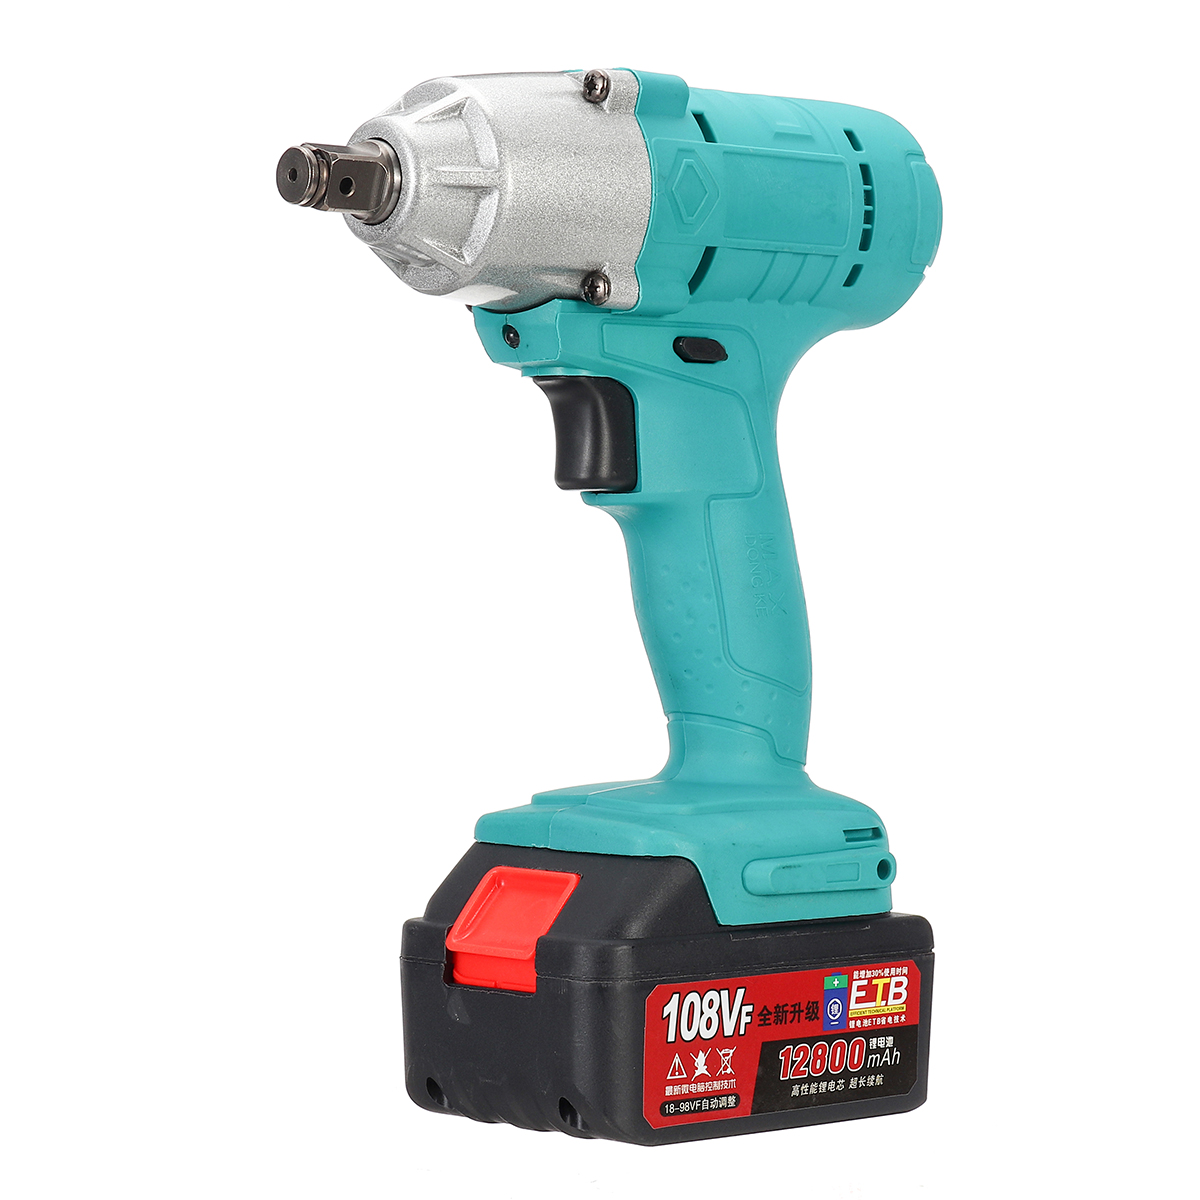 

108VF 12800mAh Lithium-Ion Battery Electric Cordless Impact Wrench Drill Driver Kit